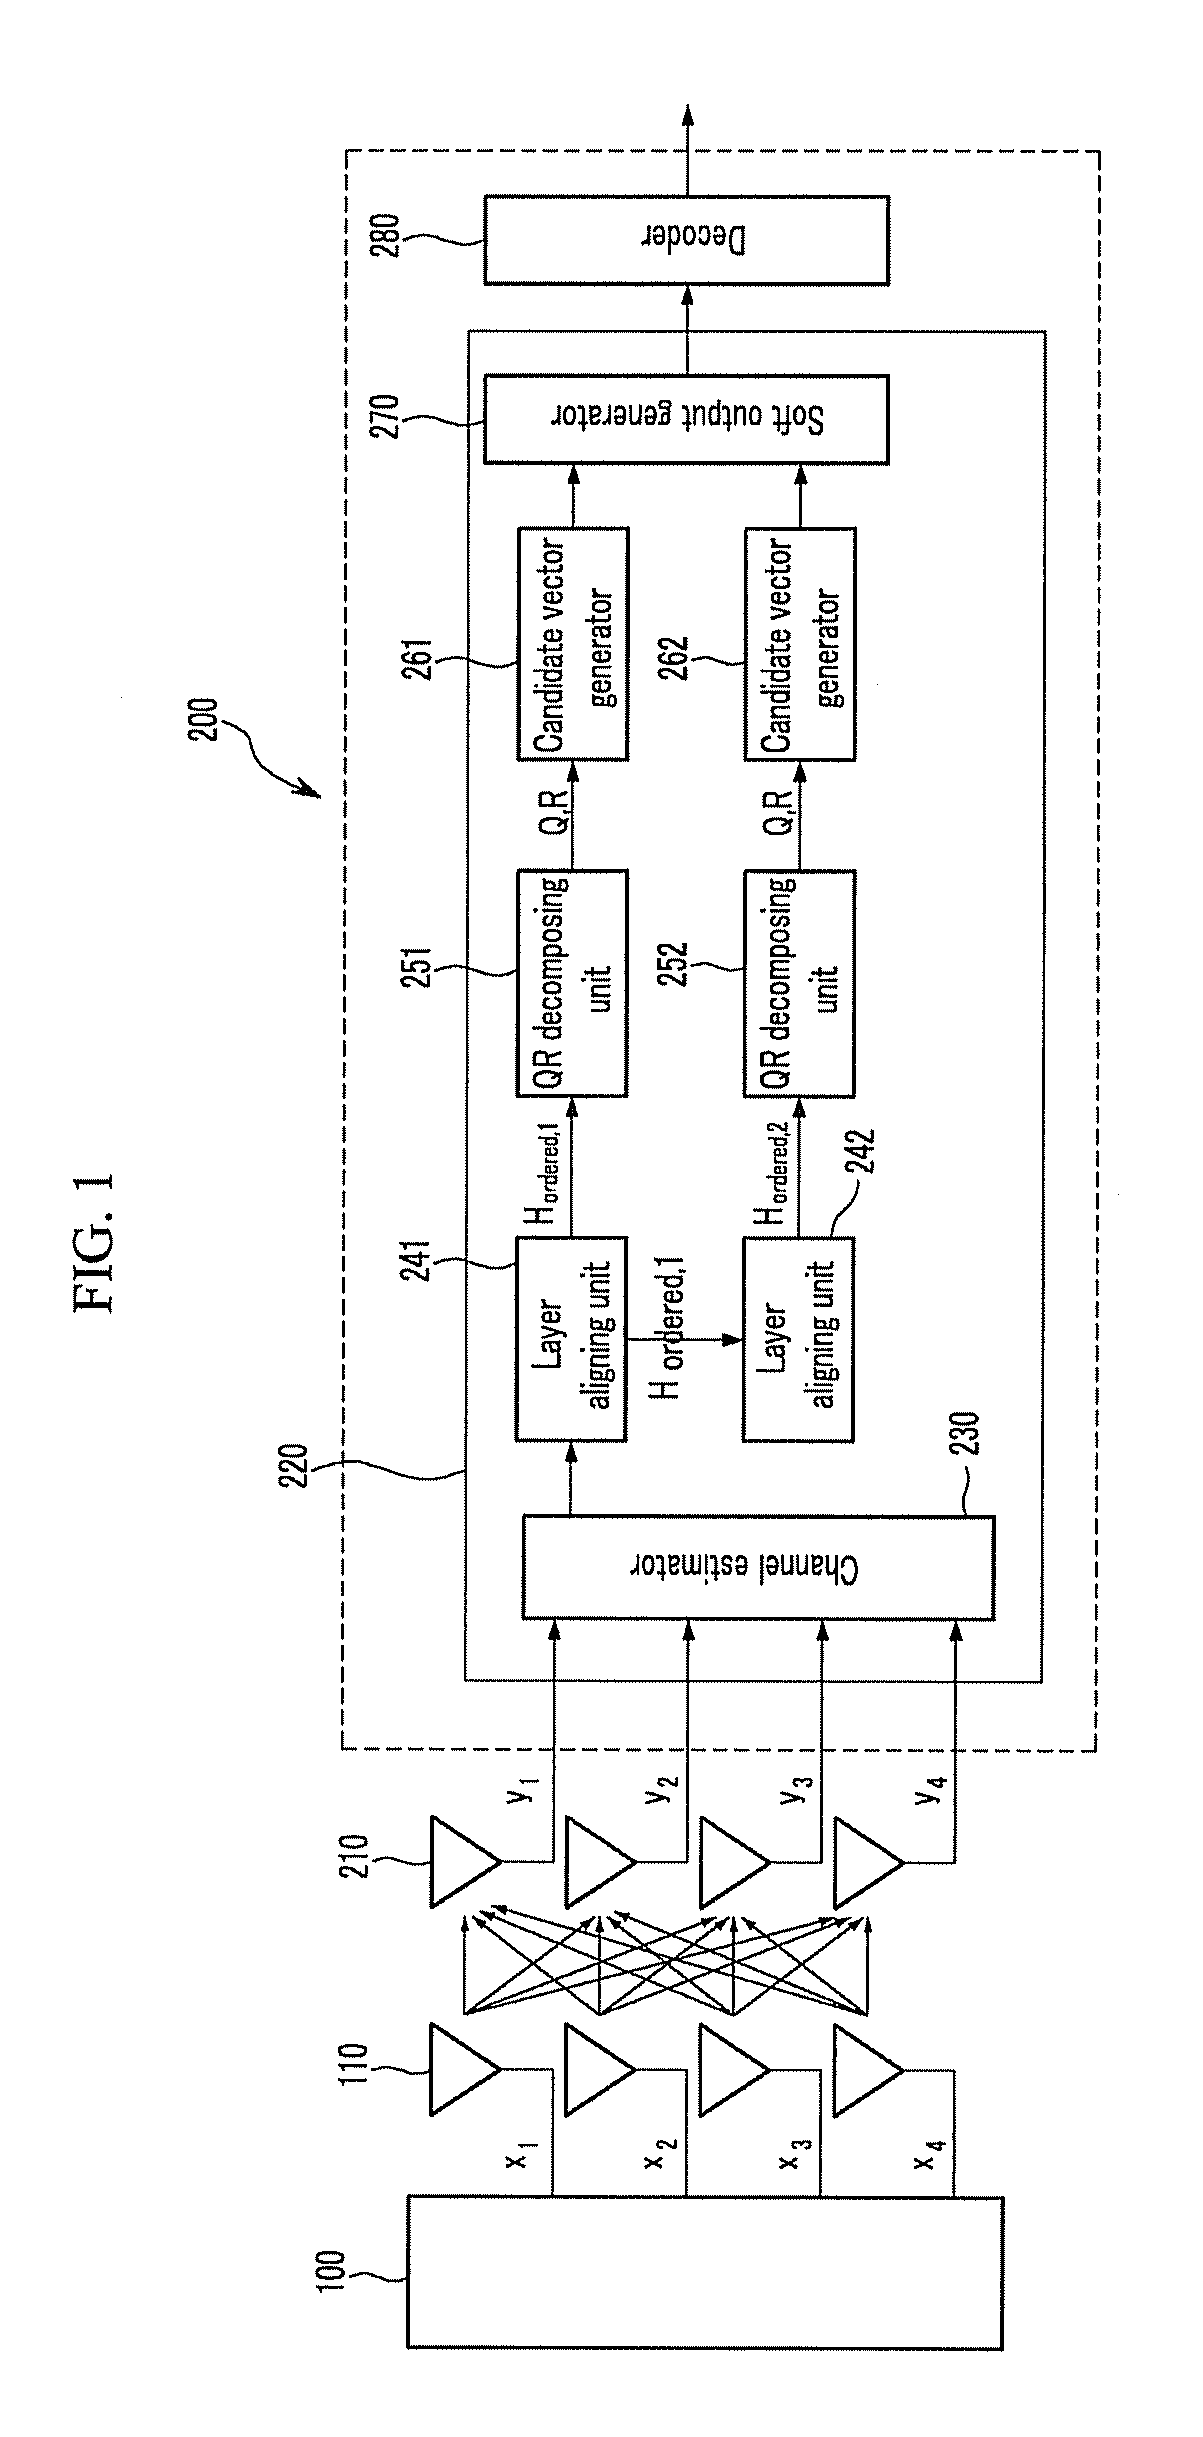 Method for detecting signal, device for detecting signal, and receiving device